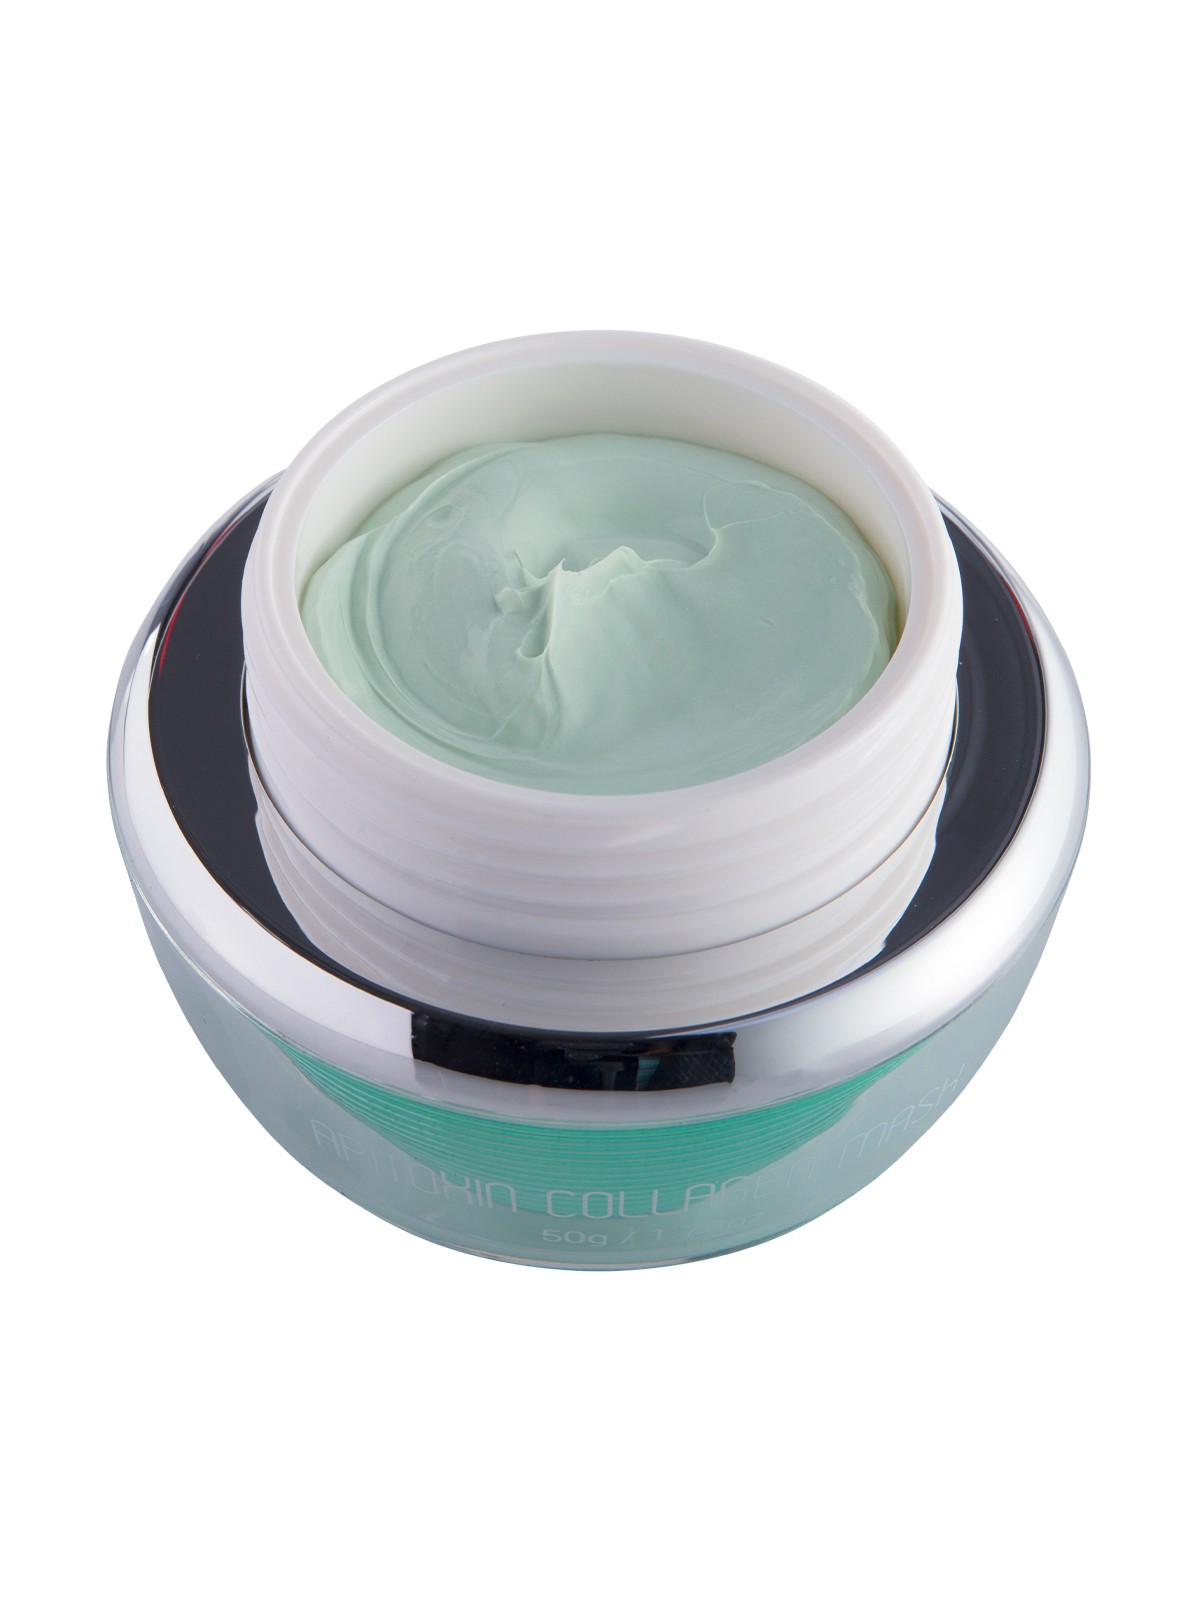 Apitoxin Collagen Mask with removed lid